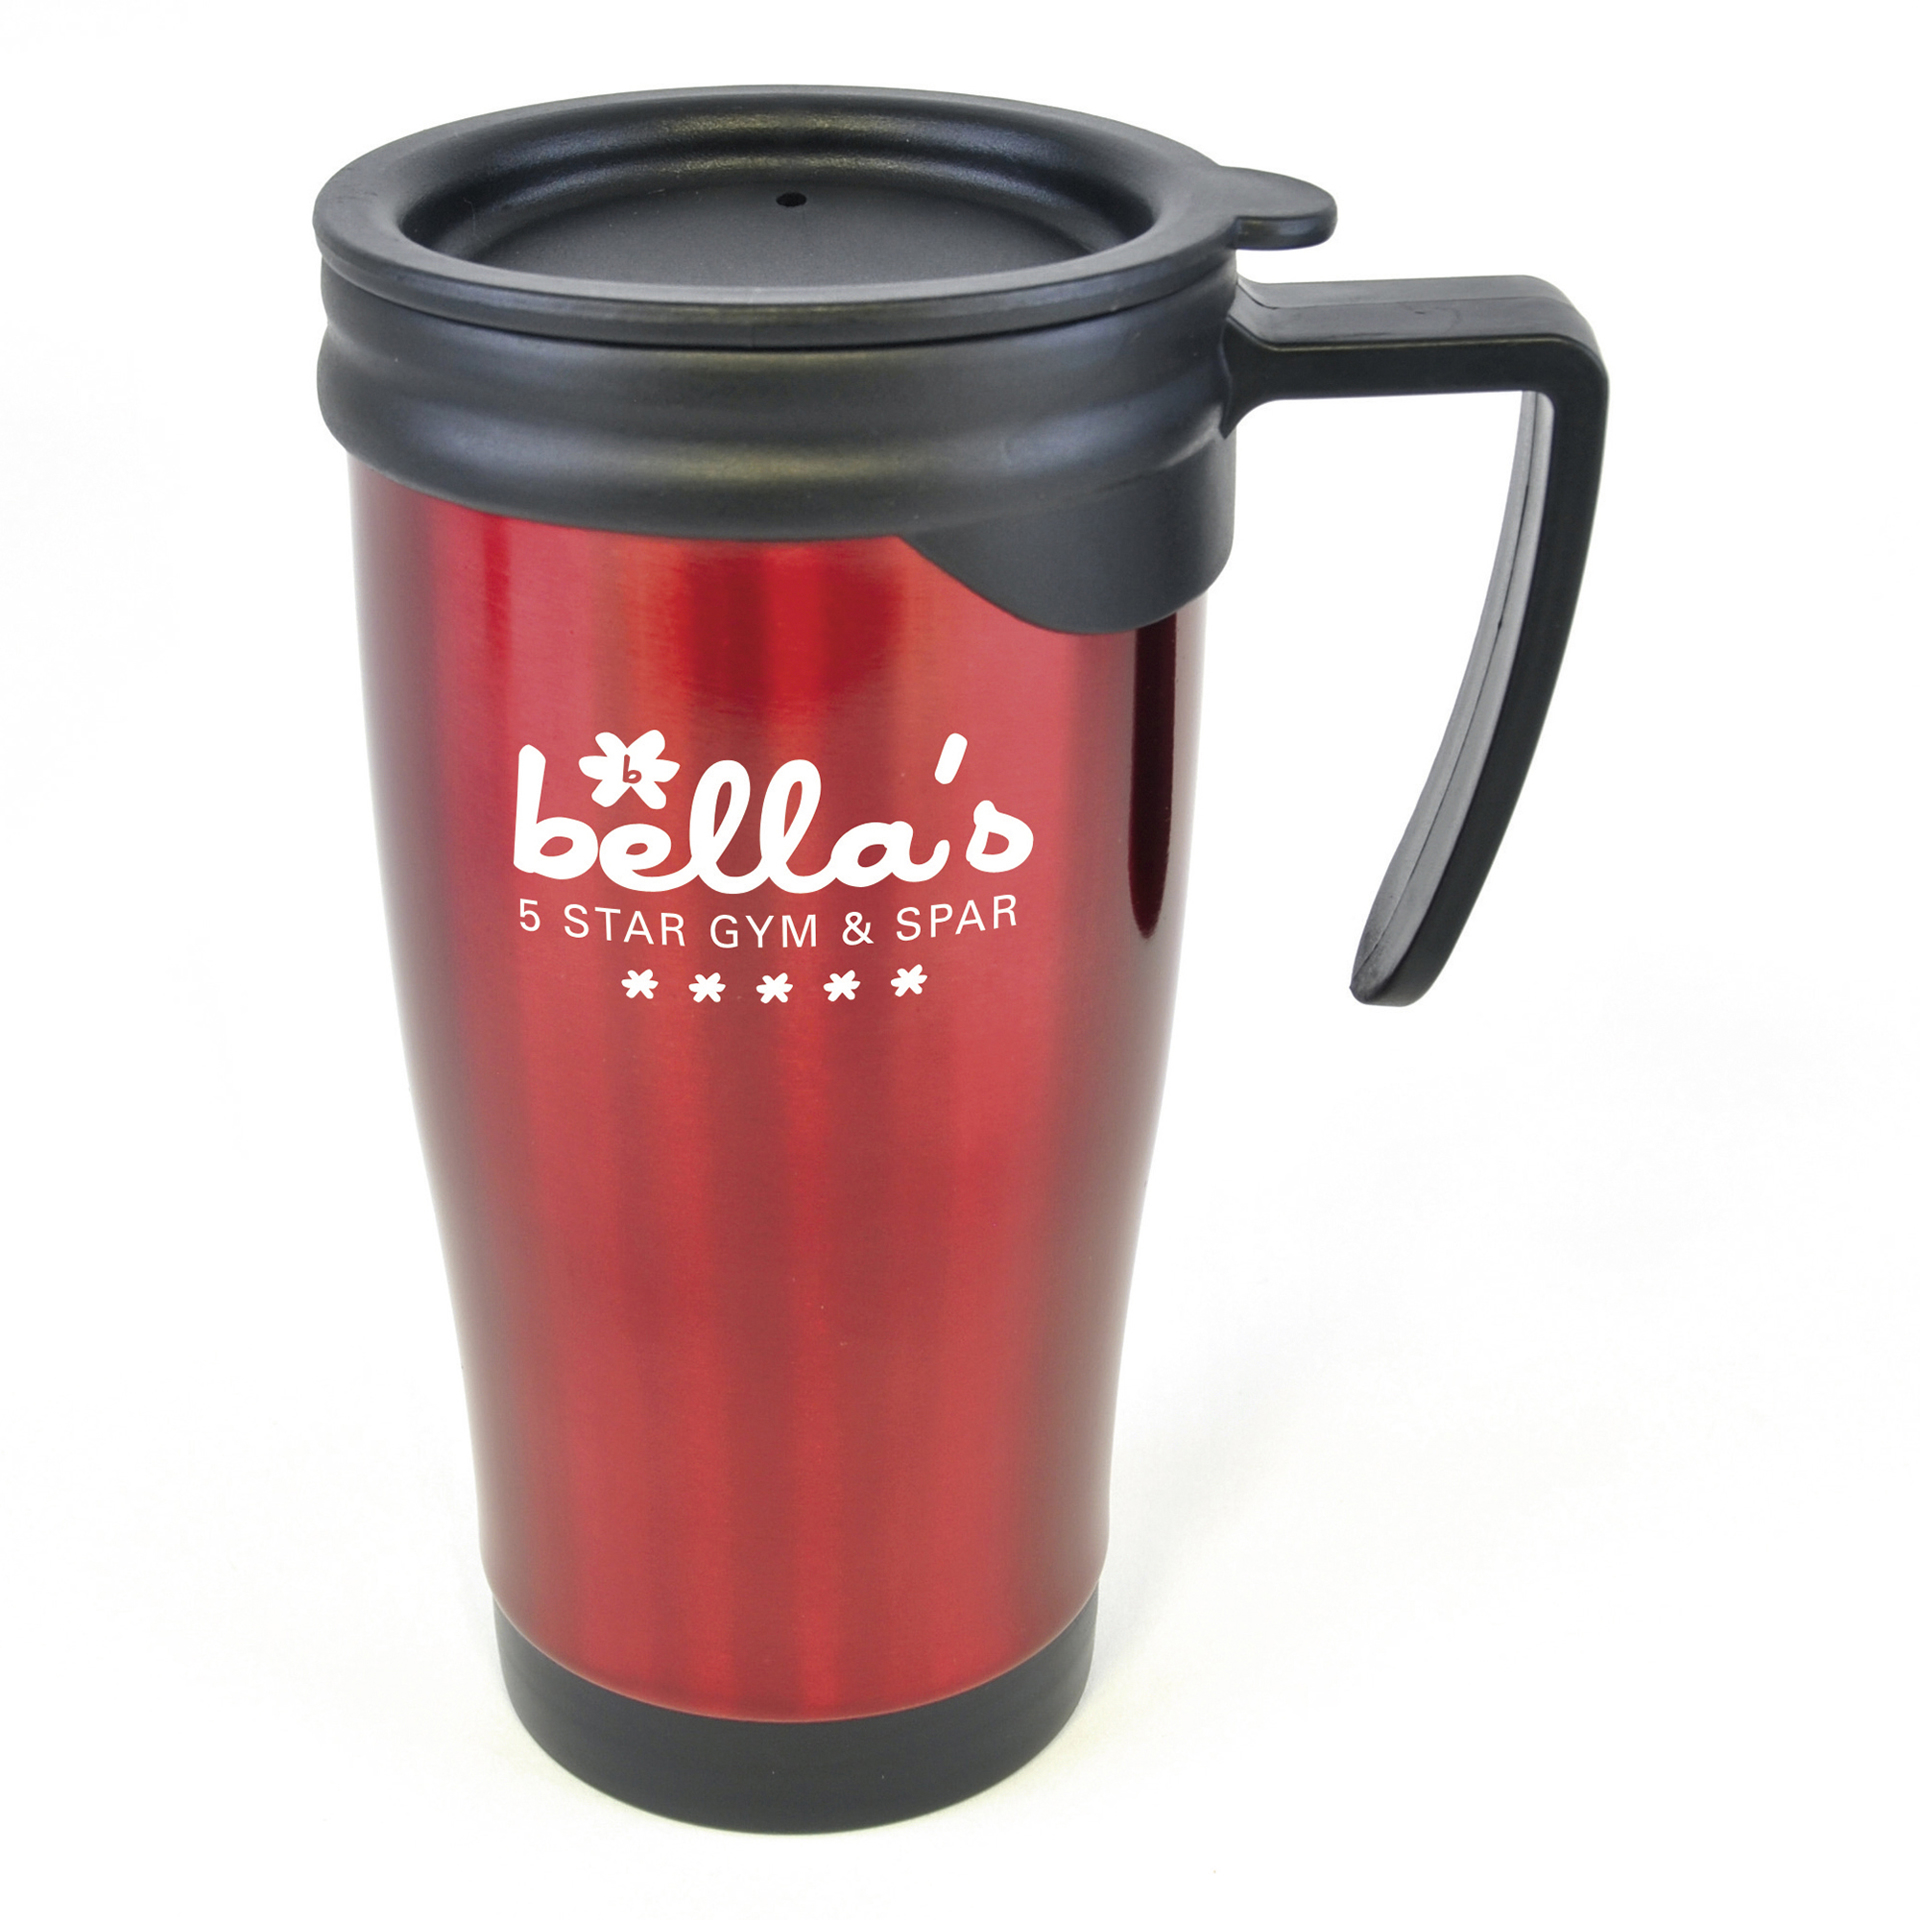 red stainless steel mug with black handle and trim